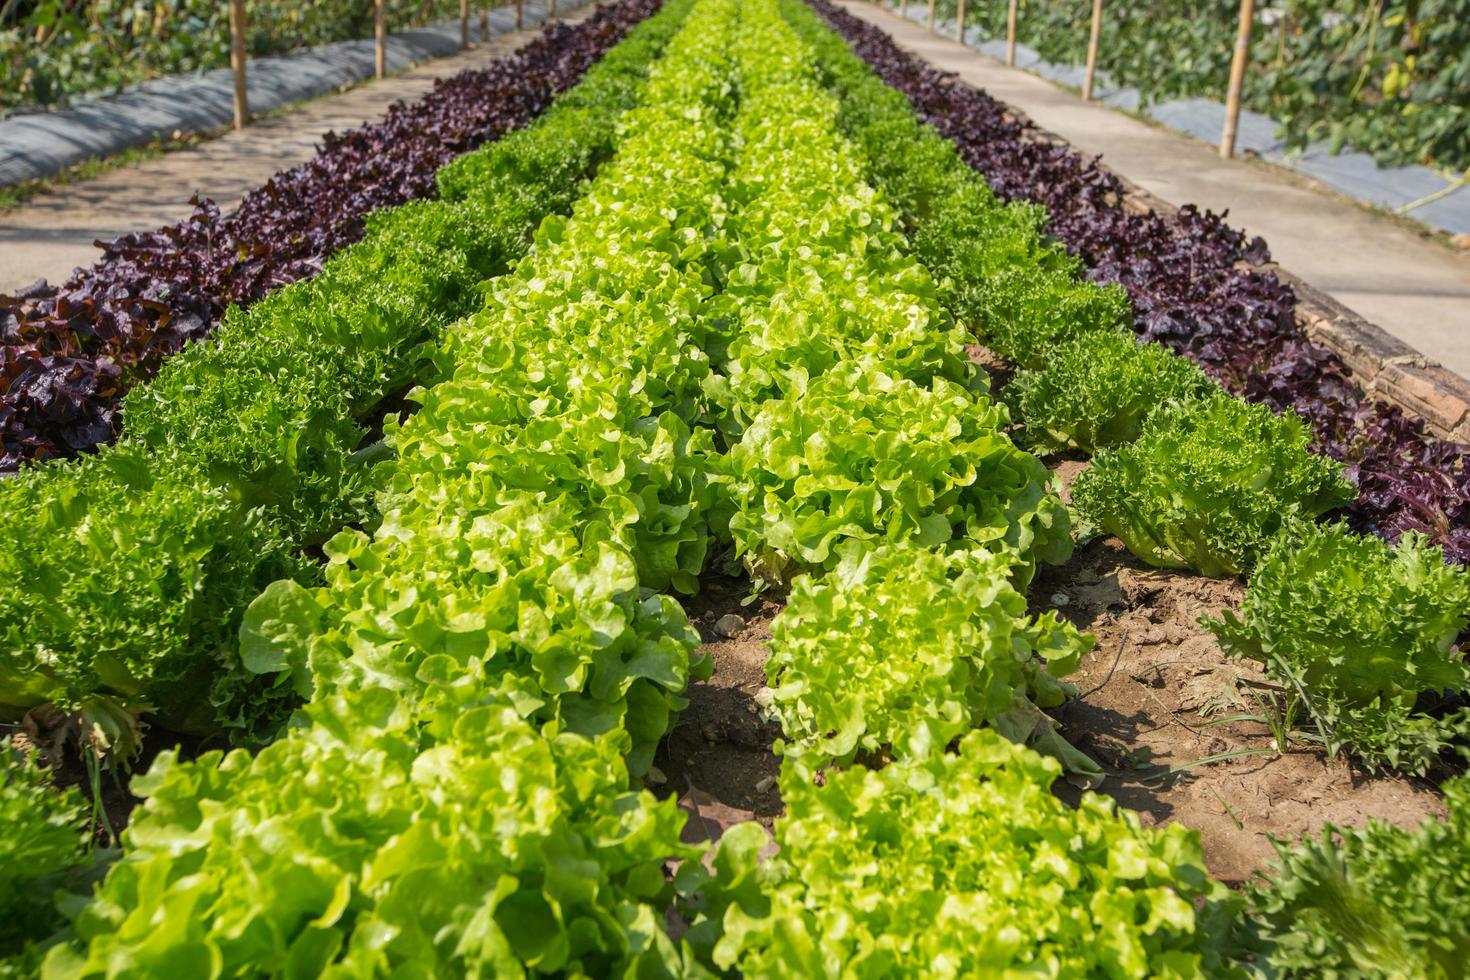 Green lettuce on field agricultural photo